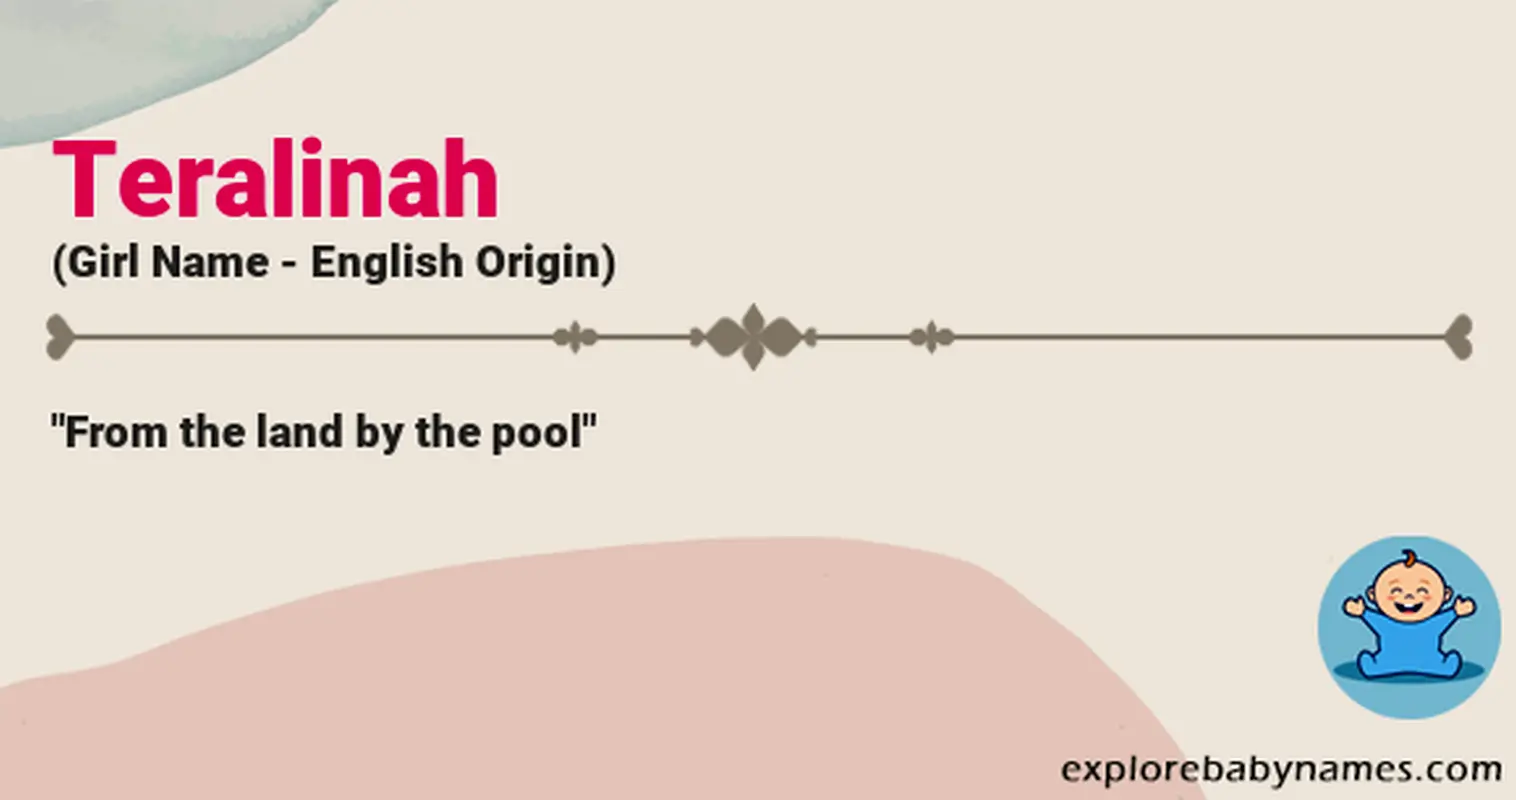 Meaning of Teralinah